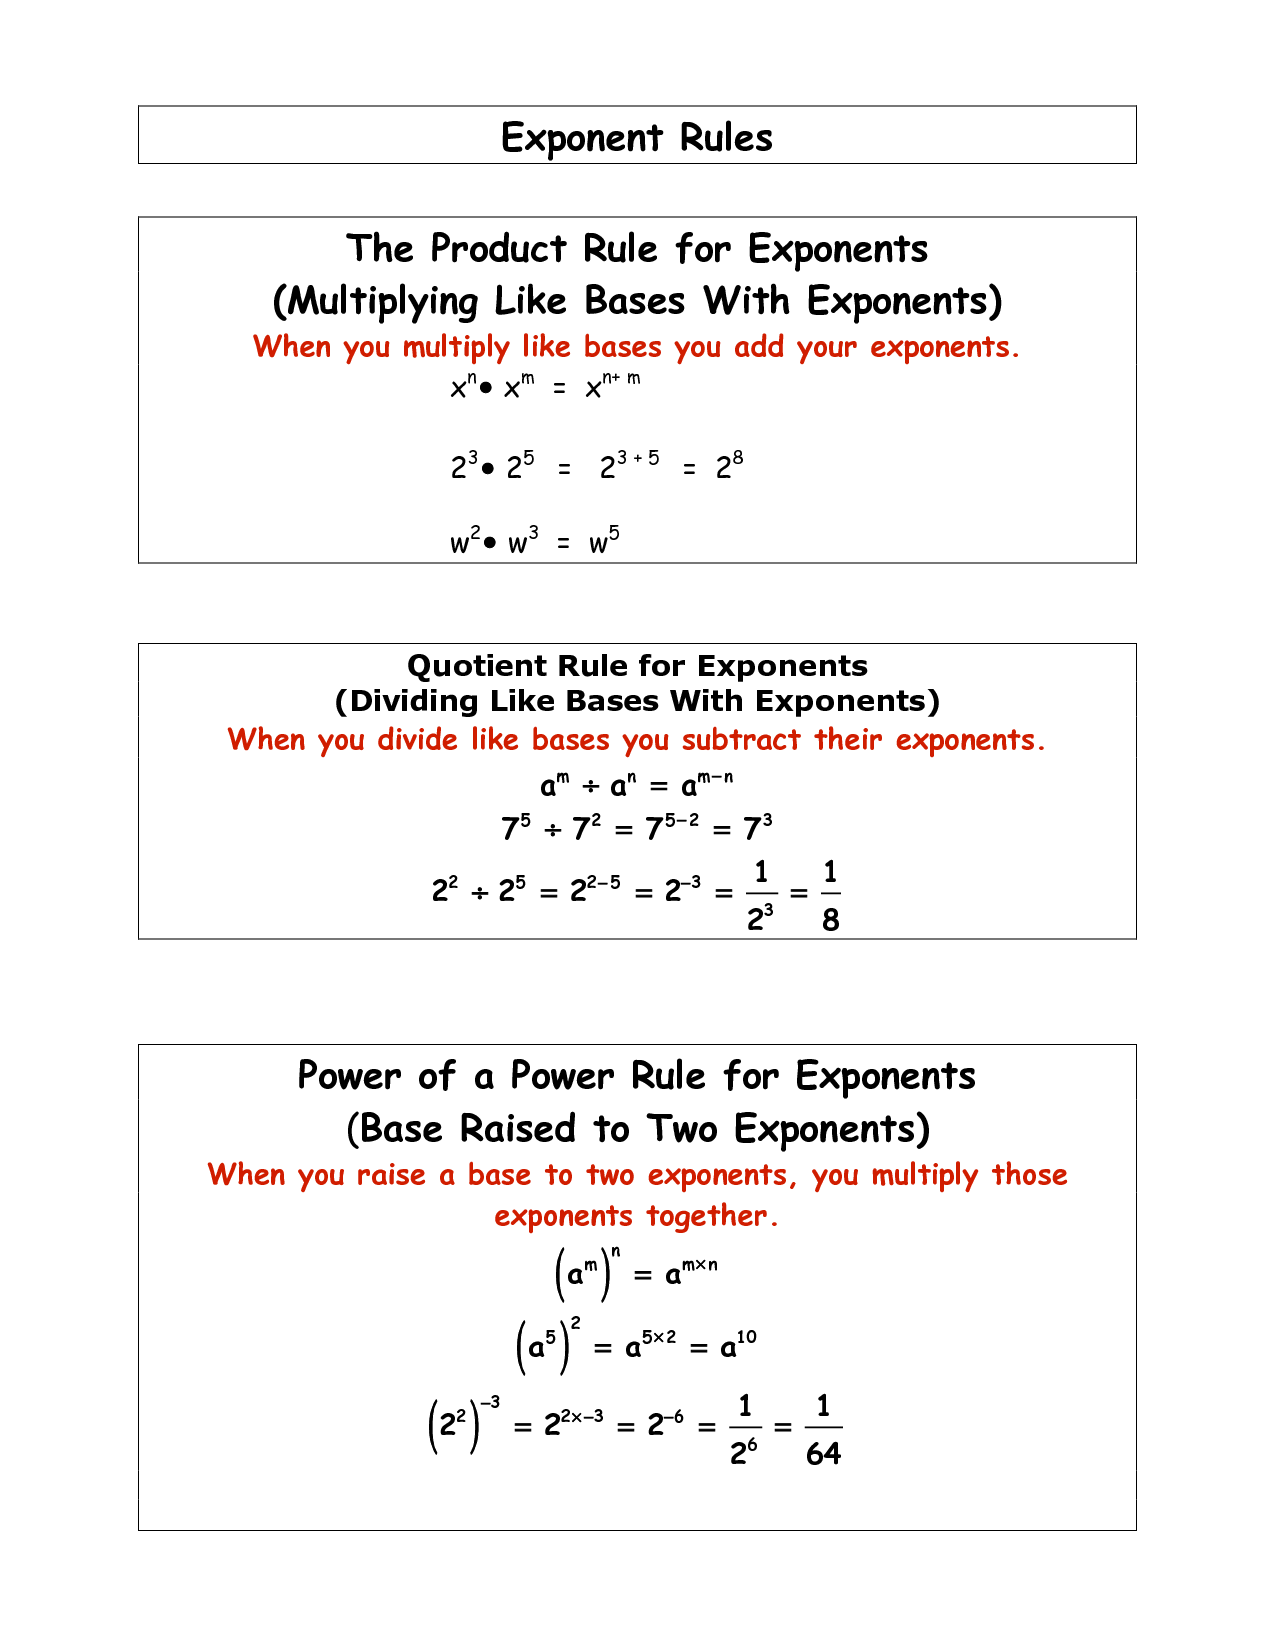 laws-of-exponents-worksheets